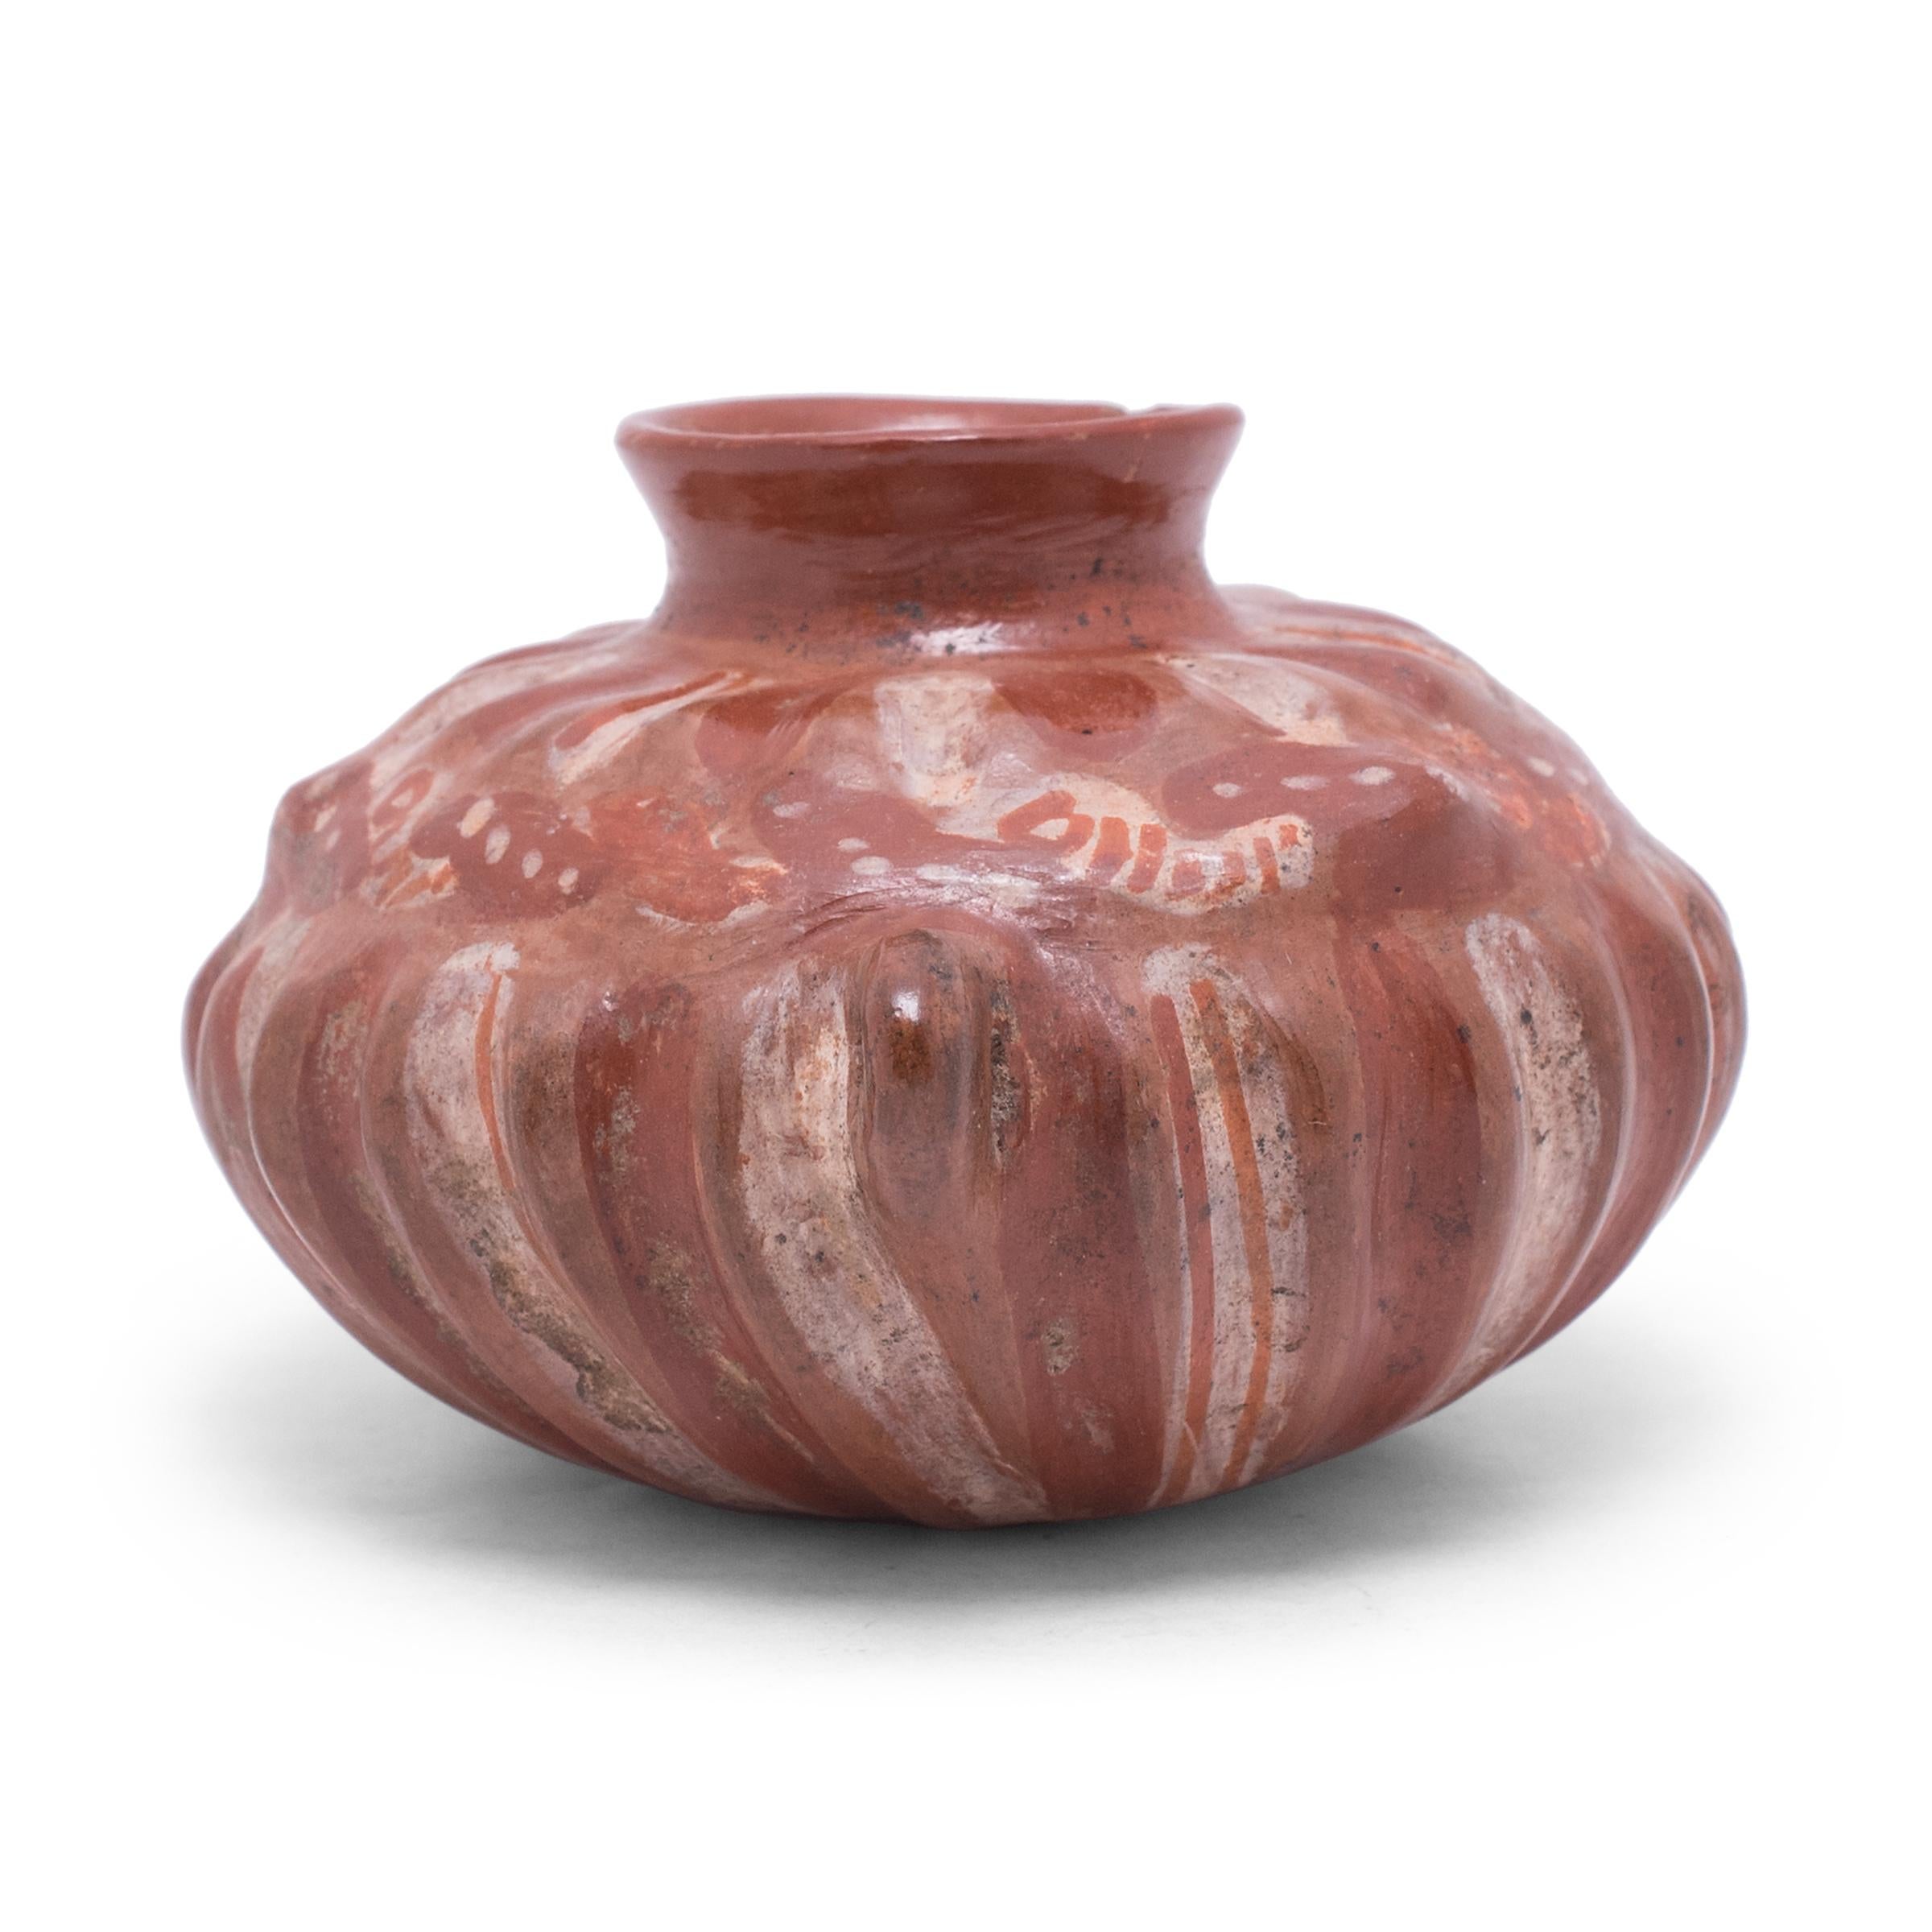 This small olla jar is a beautiful example of Mesoamerican pottery, decorated with red, white, and orange slip in the style of Chupícuaro ware. The wide, globular body of the vessel has a lobed shape resembling a squash or cactus, accentuated by